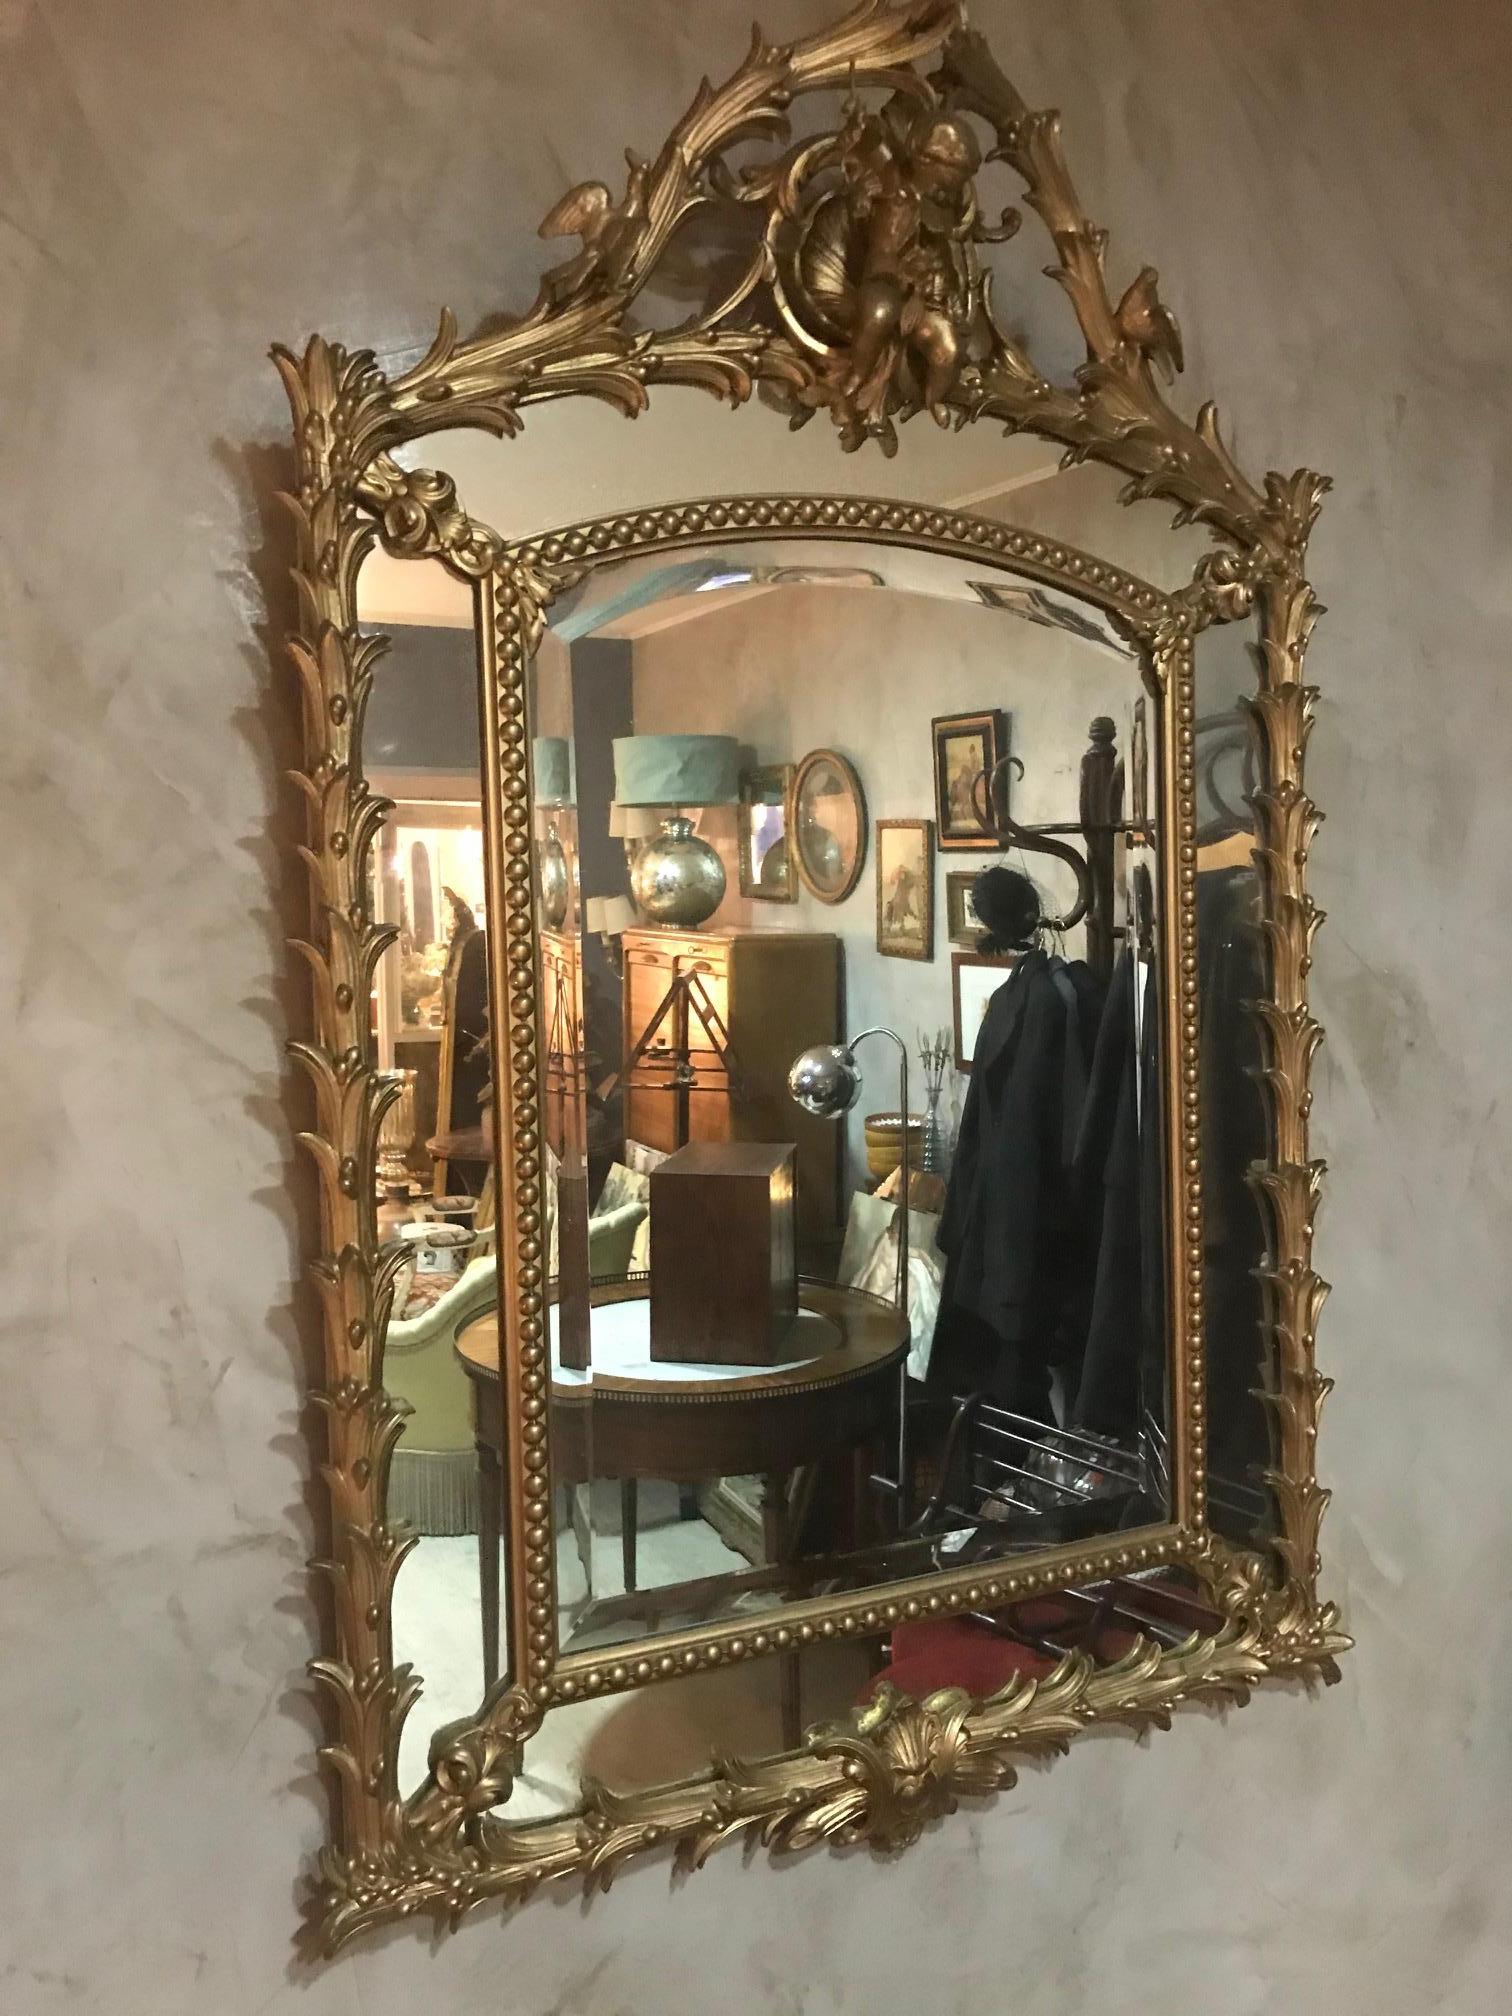 Beautiful and rare early 20th century French golden wood Louis XV mirror with an Angel holding a flower crown decoration at the top framed by two doves. 
Beveled glass in the middle. The wood has been re-painted. 
Excellent quality.